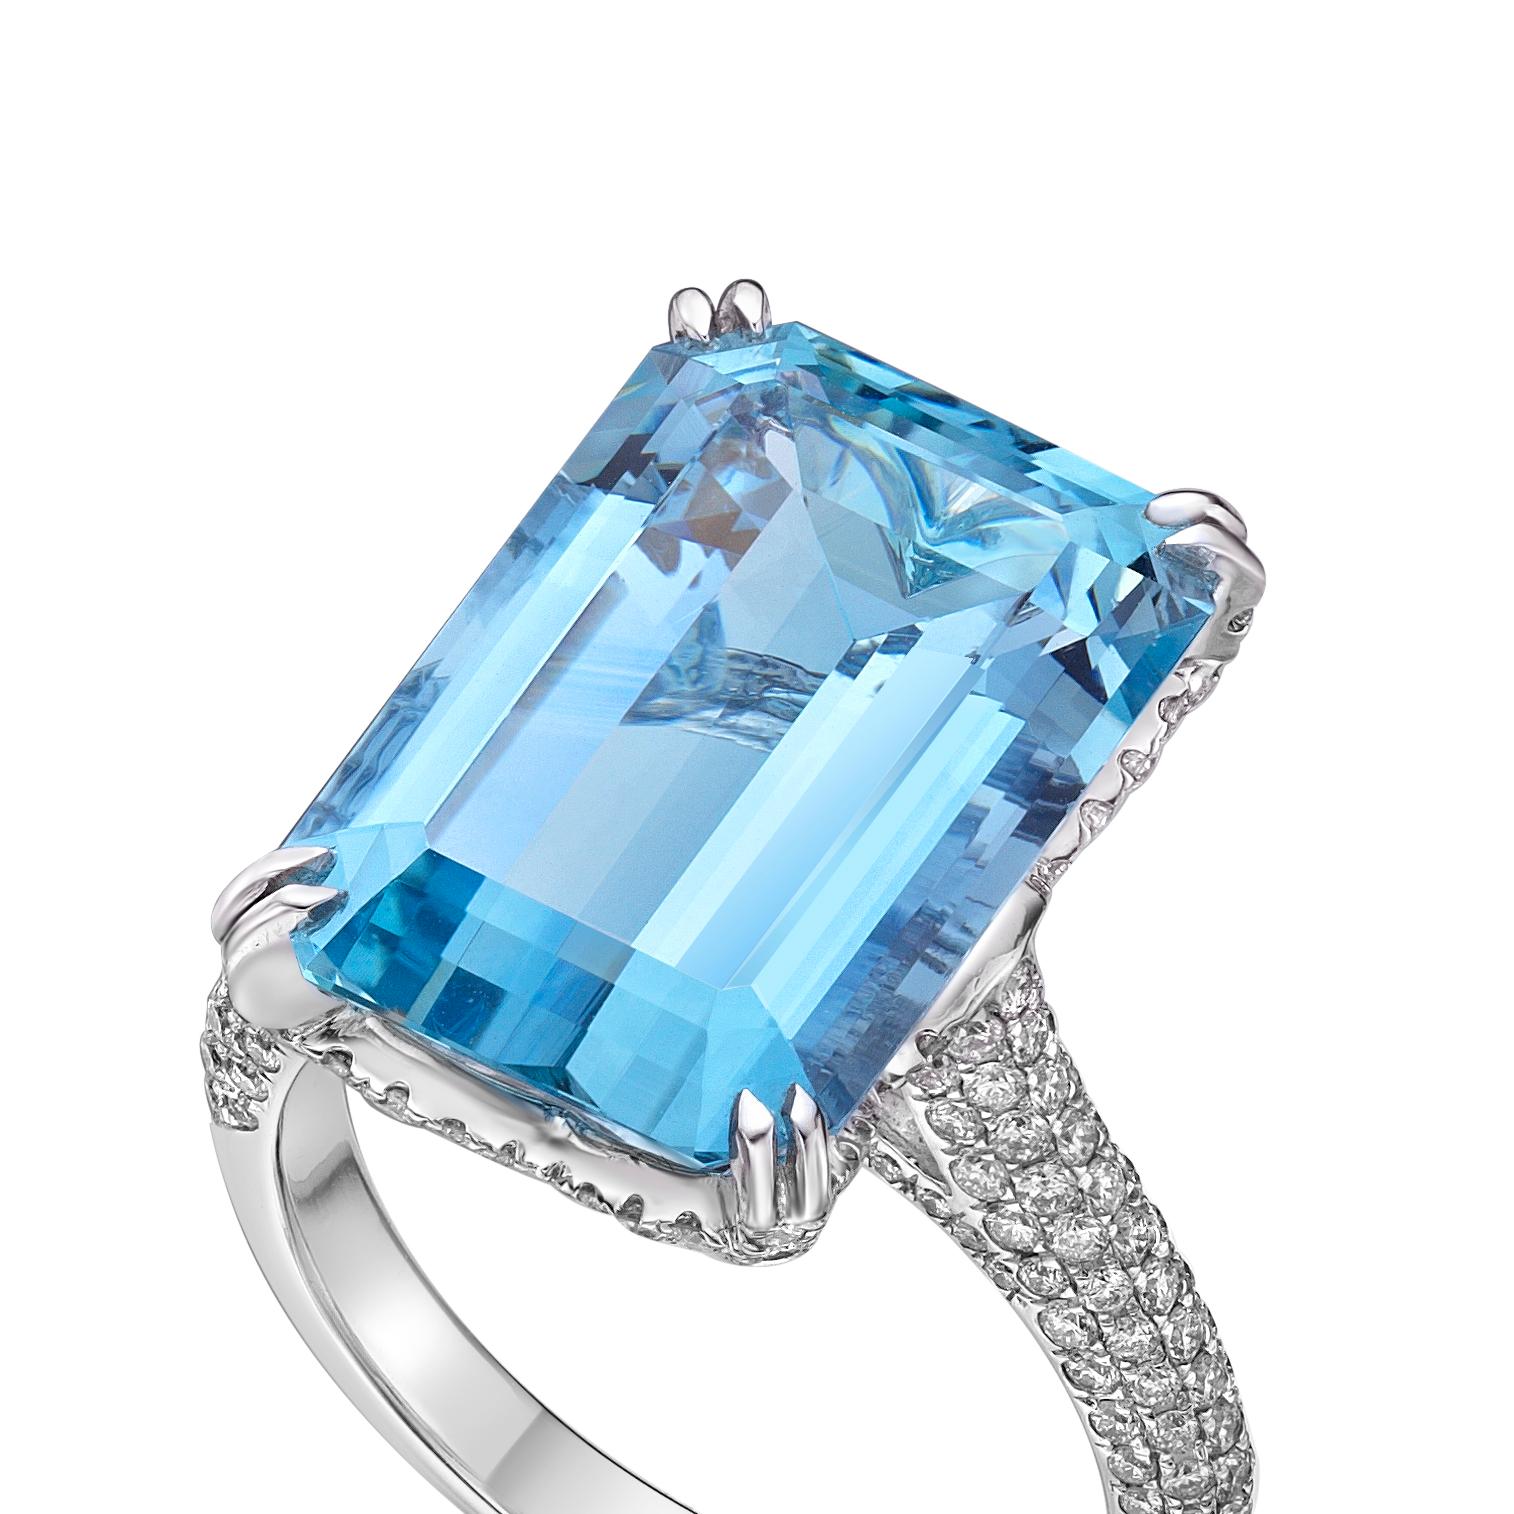 GILIN 18K White Gold Diamond Ring with Aquamarine For Sale 1